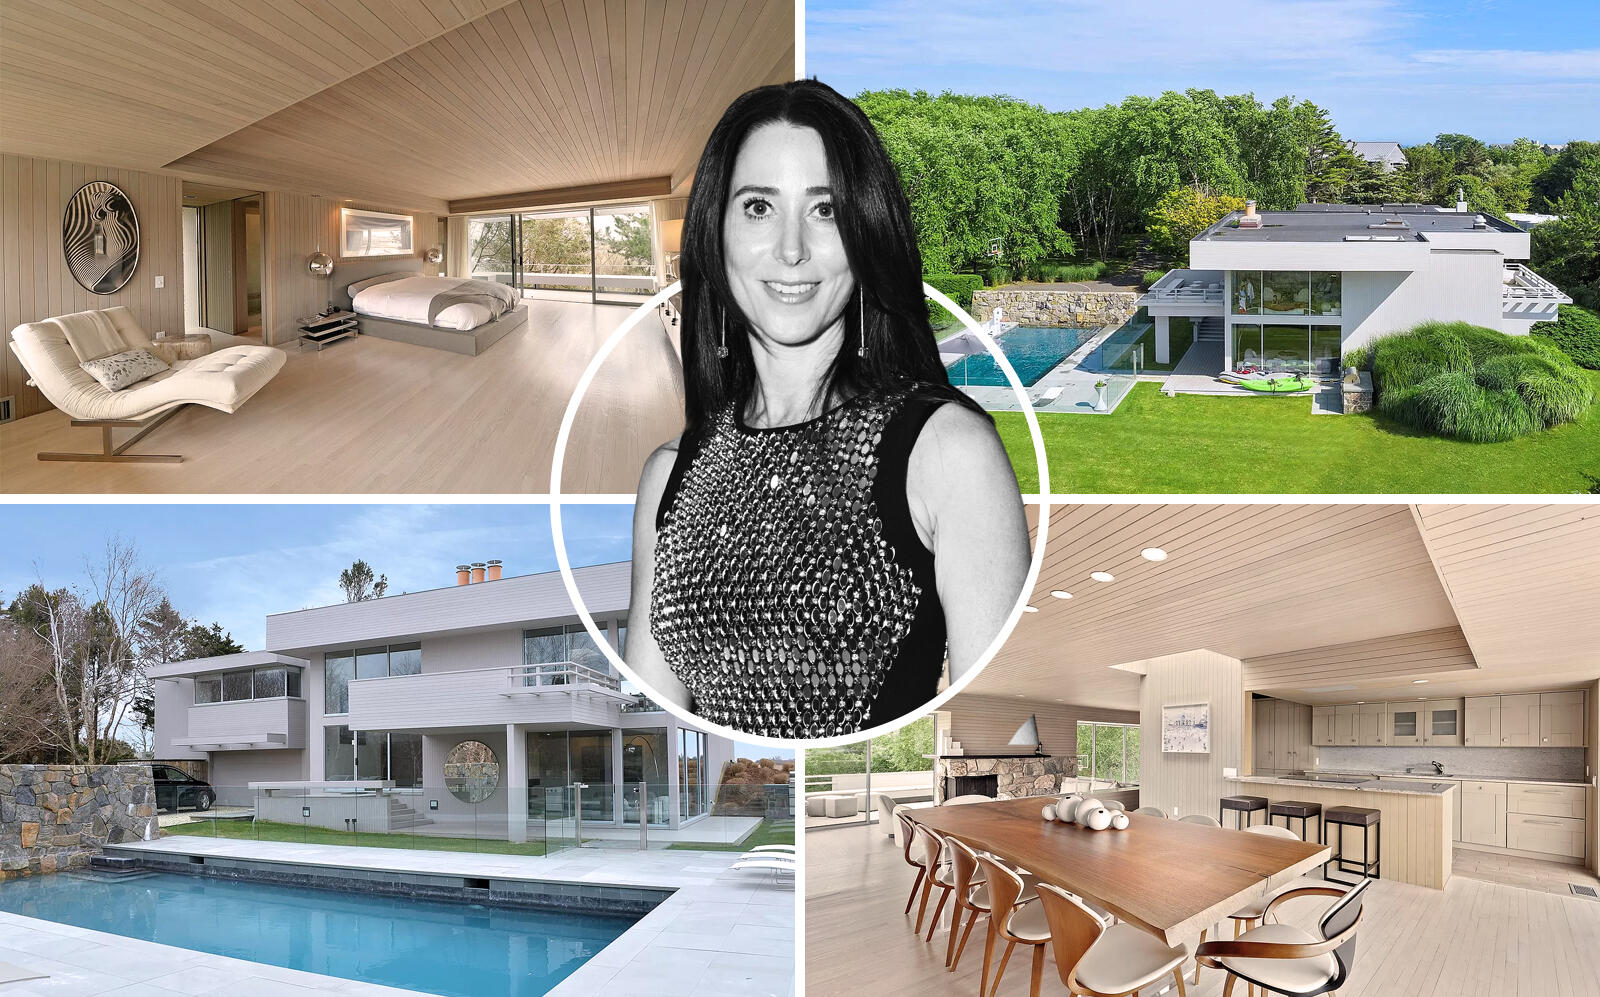 Stacey Bronfman and her Norman Jaffe house. (Getty, Douglas Elliman)